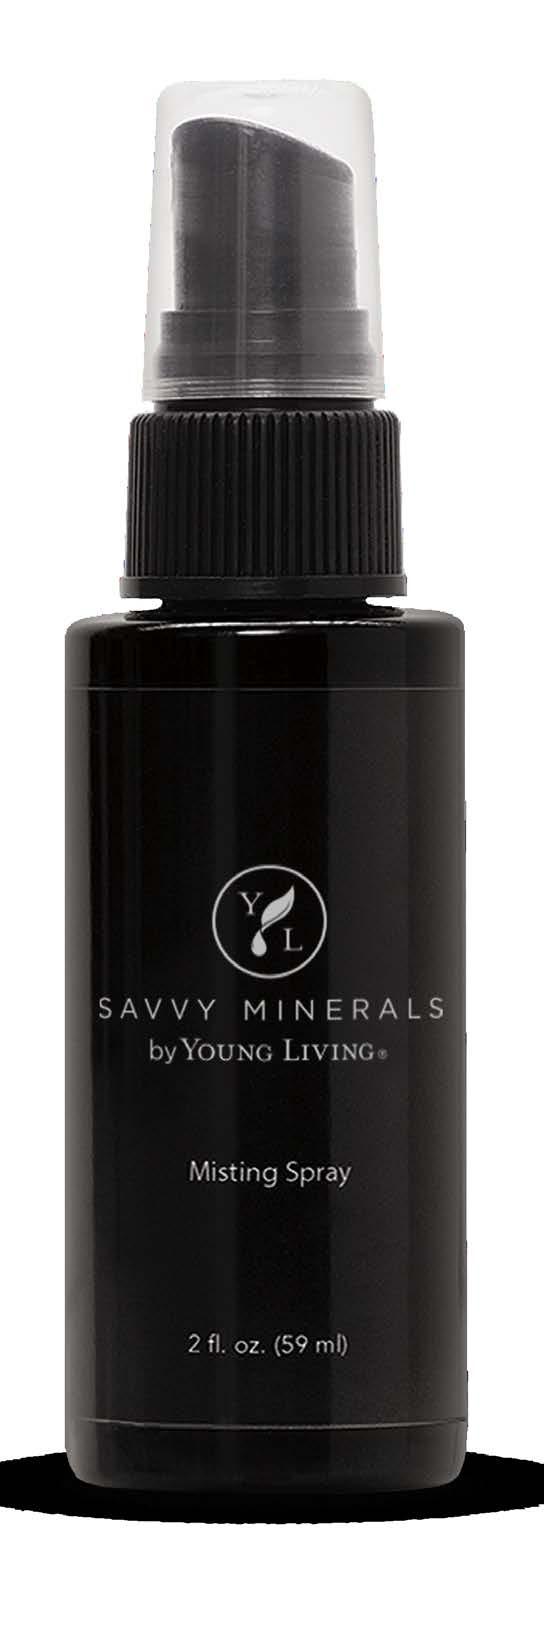 plant-based ingredients, Savvy Minerals